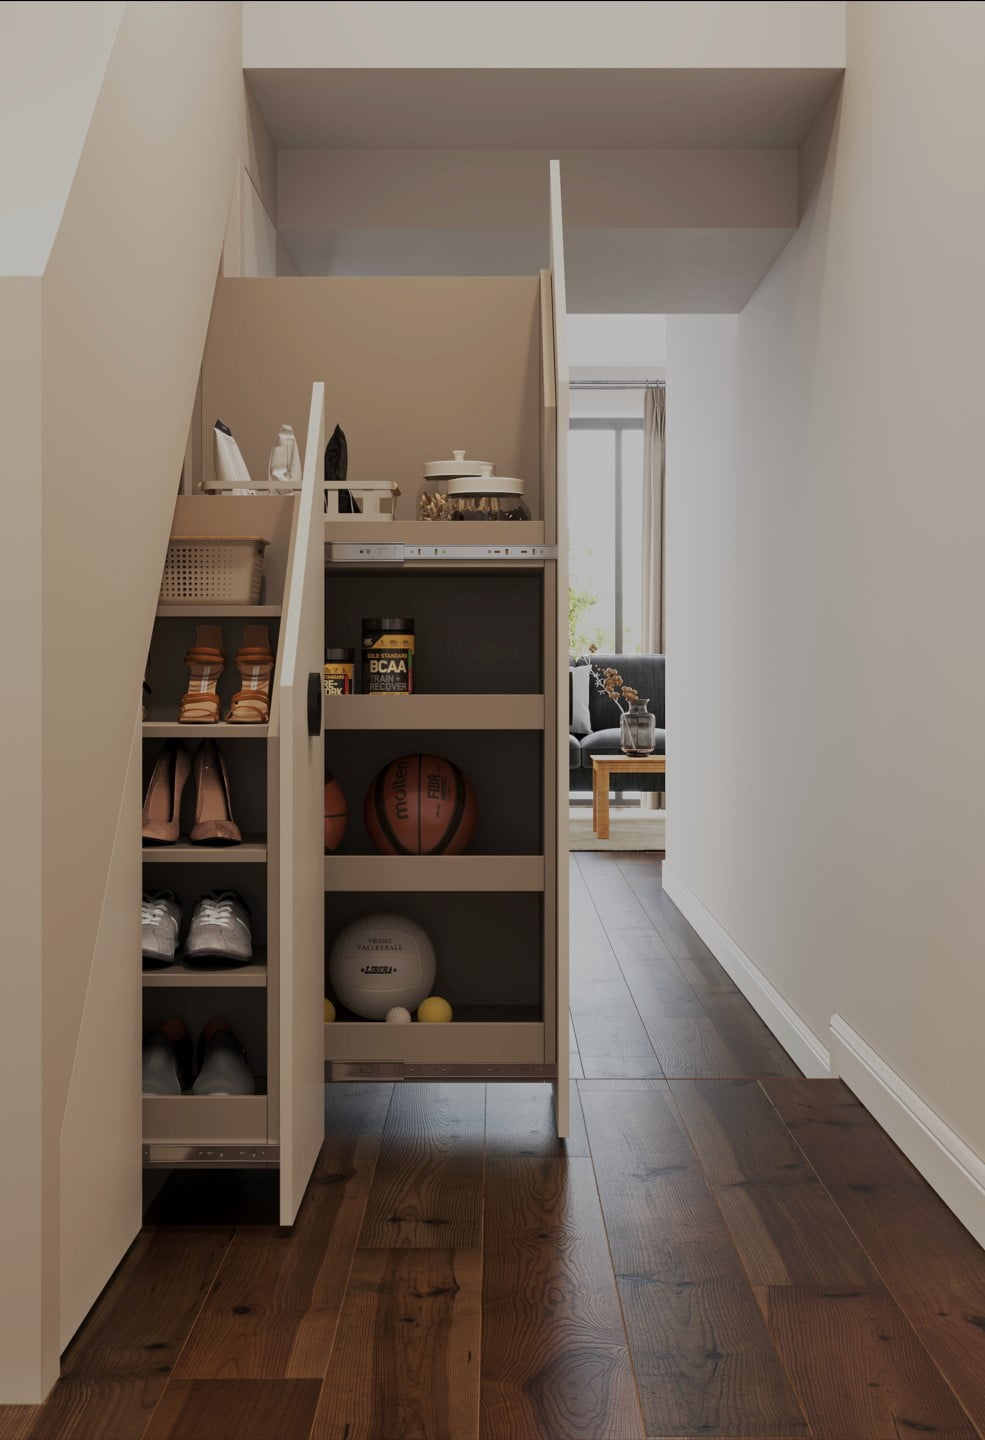 20 Best Under Stair Storage Ideas - What to Do With Empty Space Under Stairs